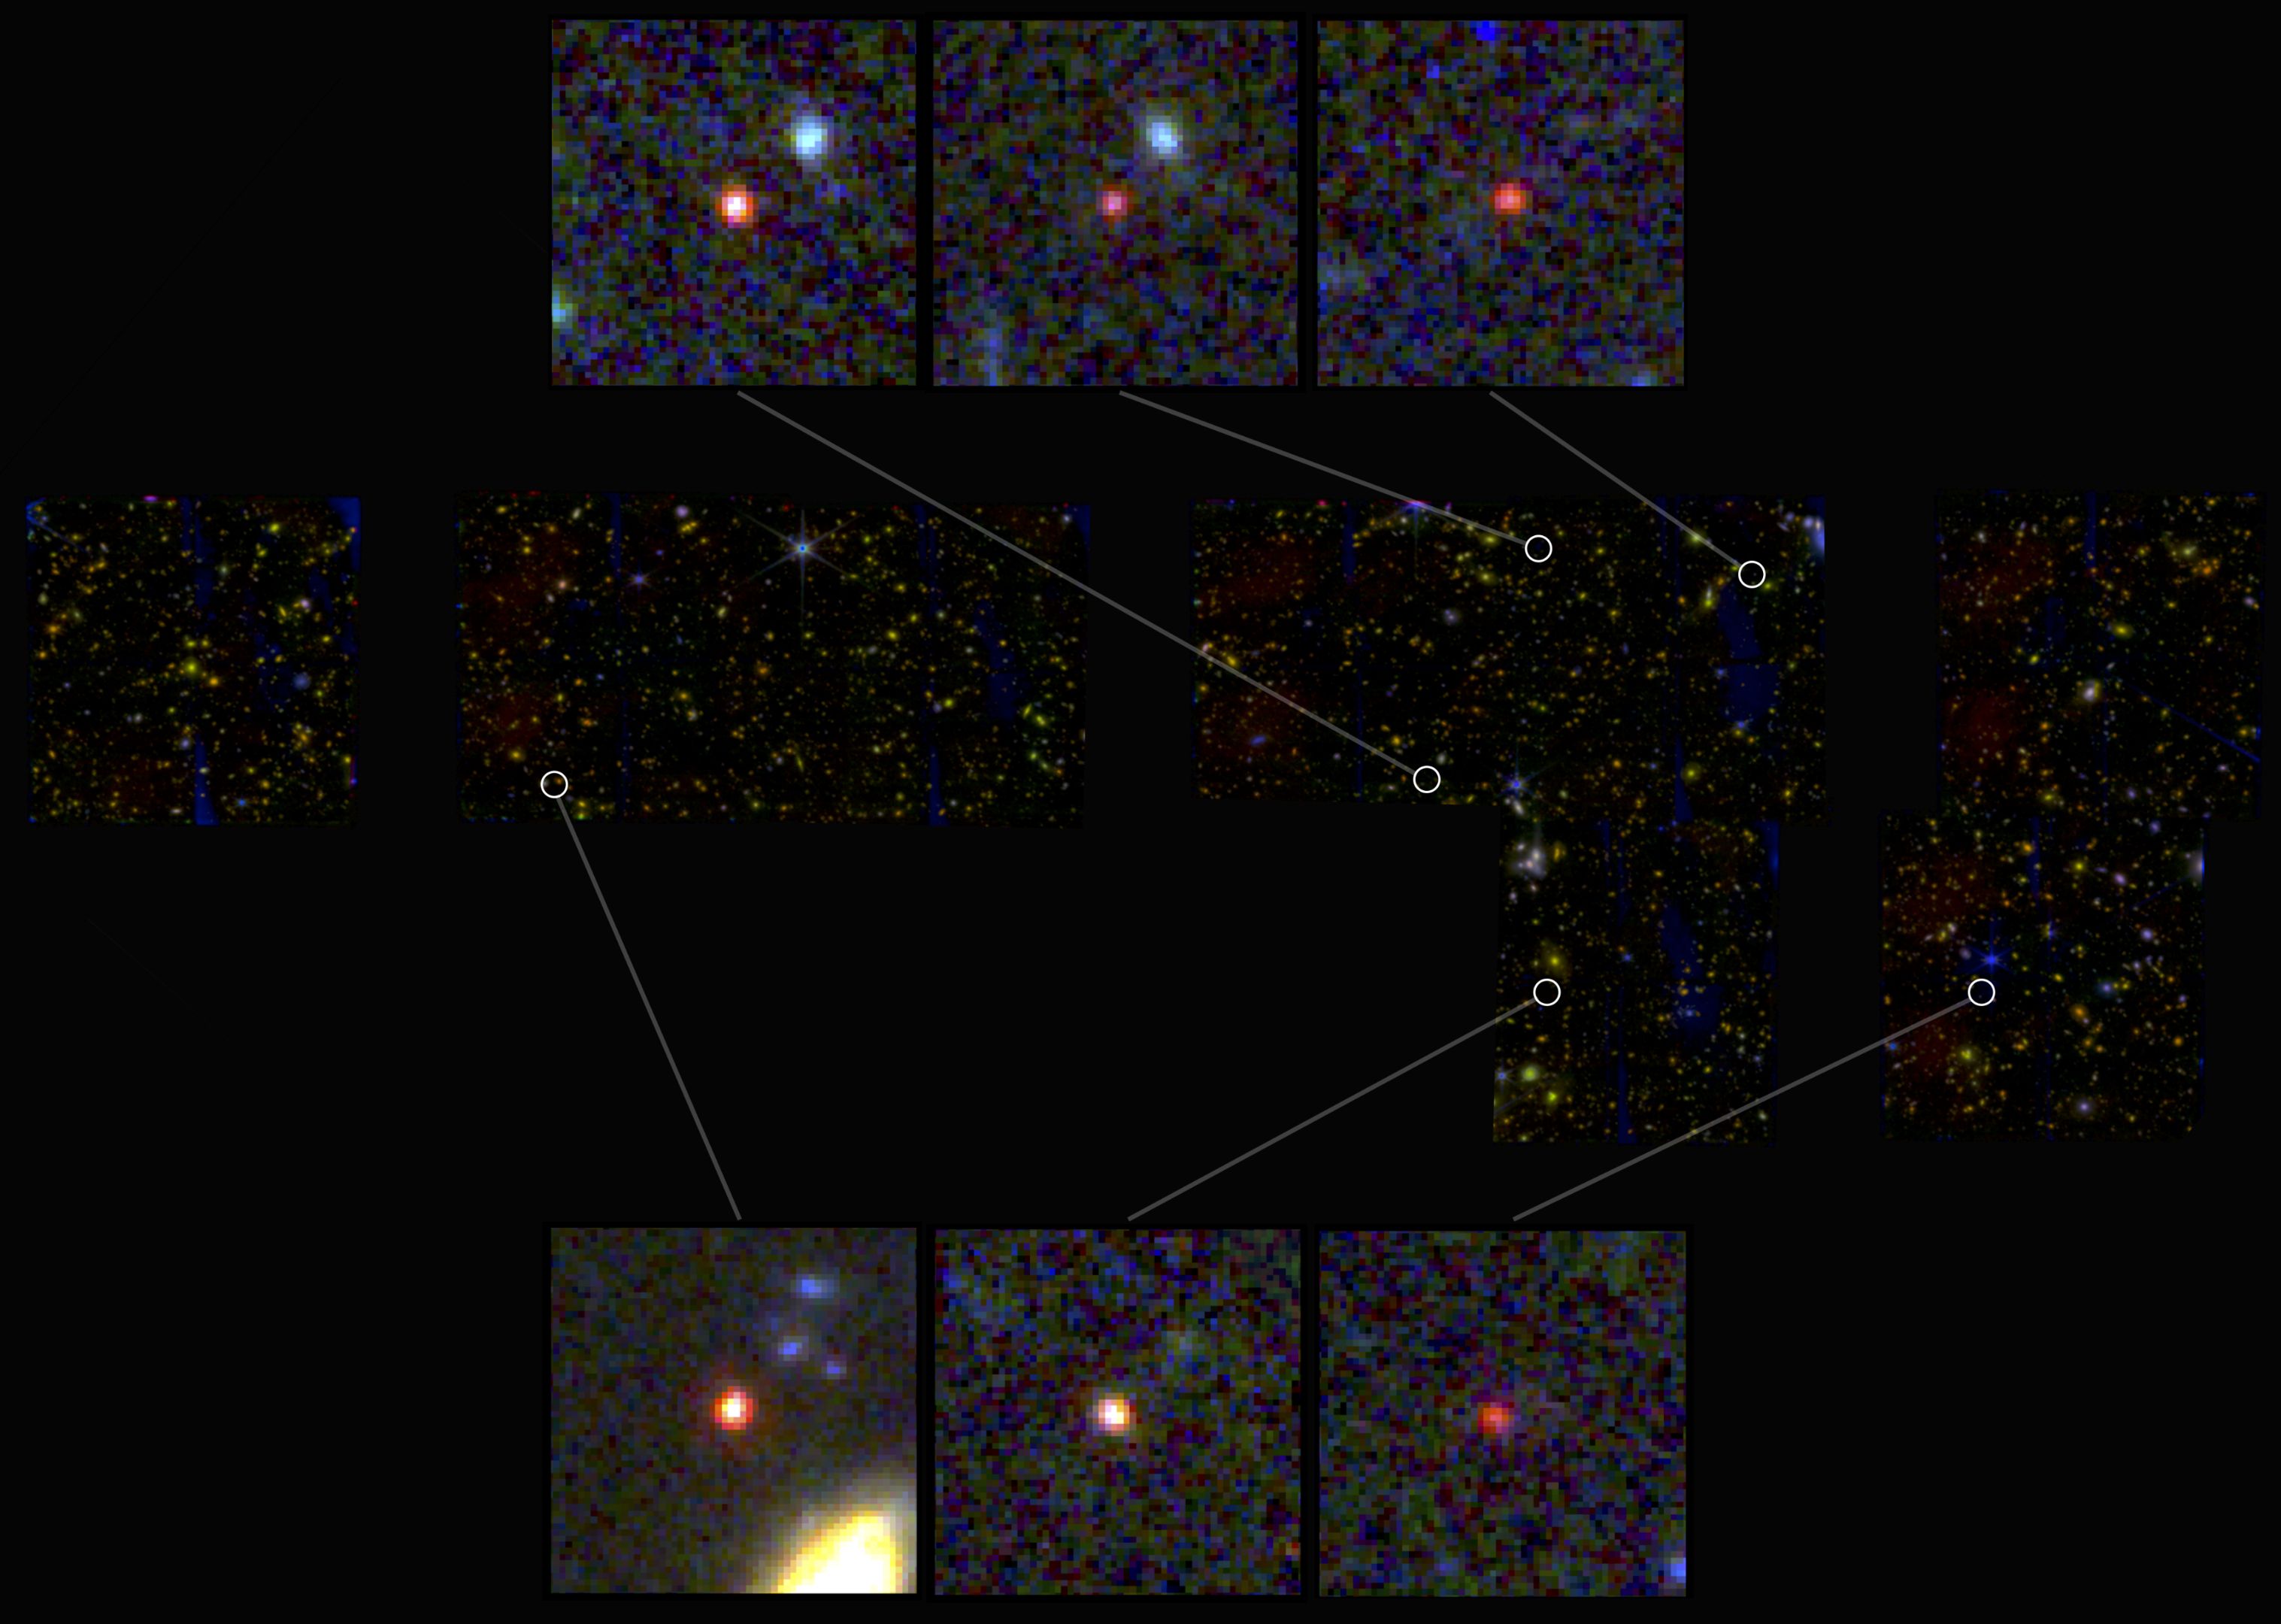 6 galaxy photos accompanied by more zoomed-out images of the space surrounding, with circles showing where the galaxy is located